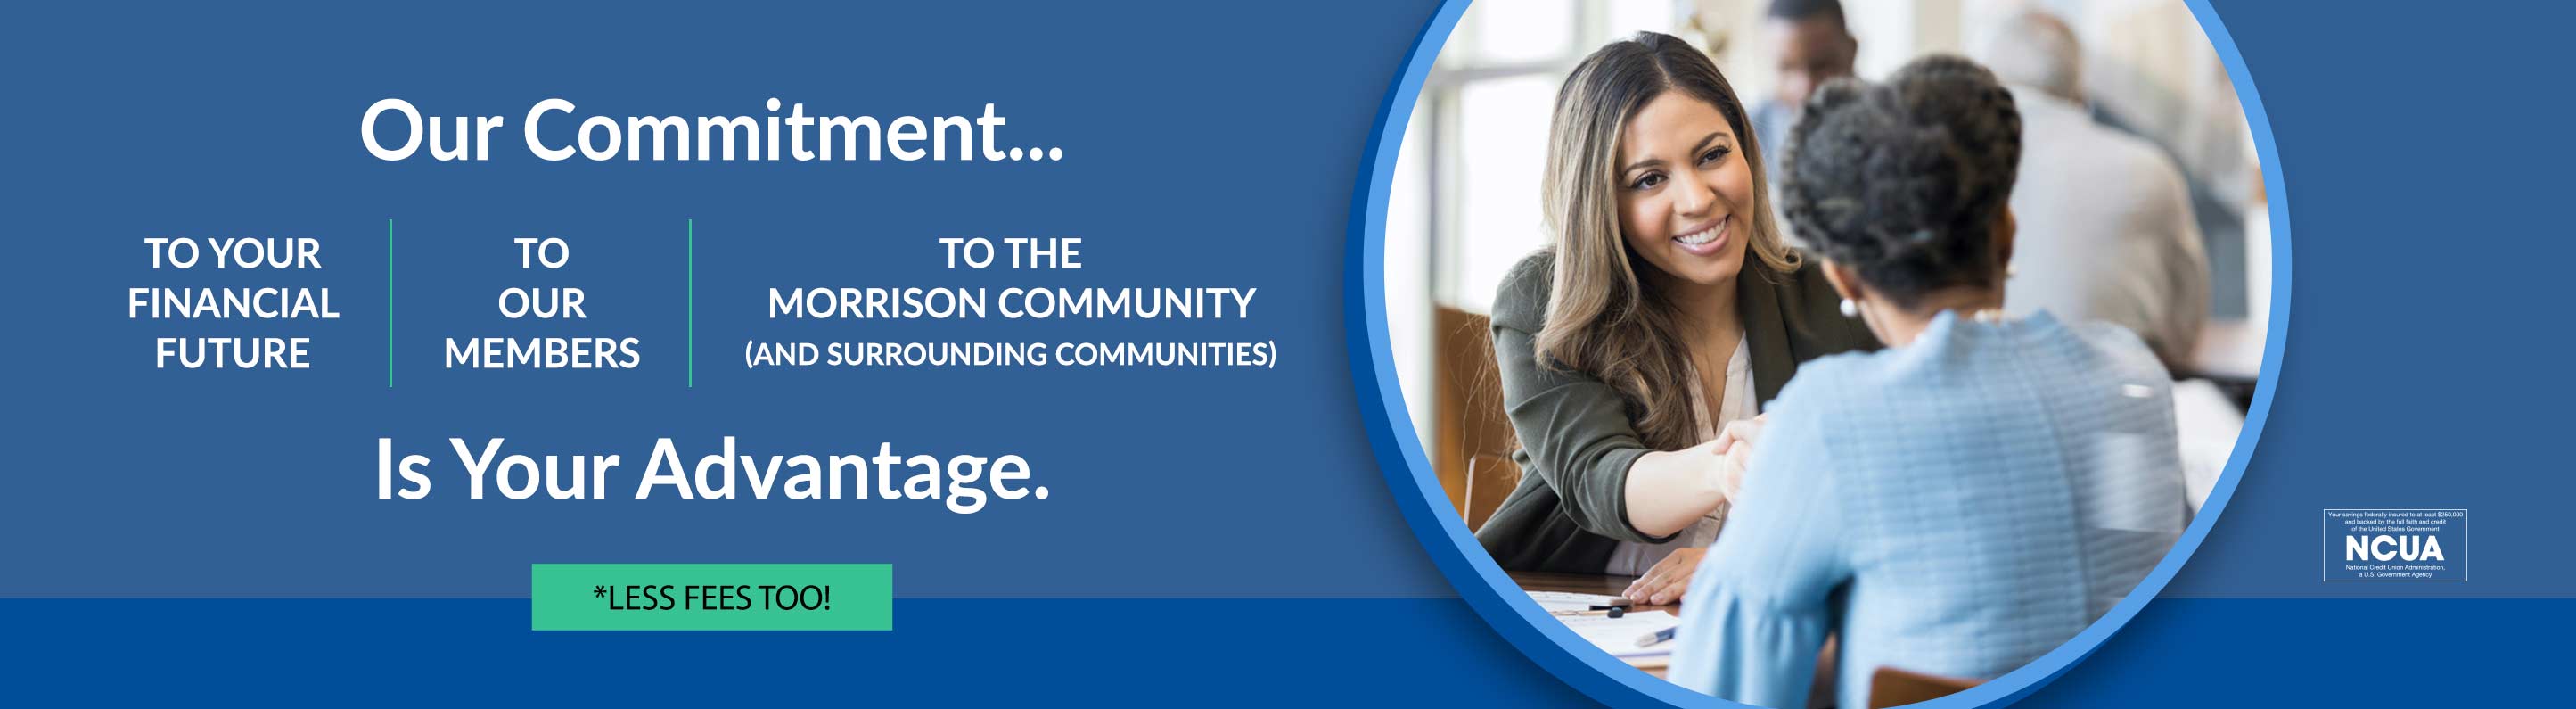 Our commitment... to your financial future | to our members | to the morrison community is your advantage. *less fees too!